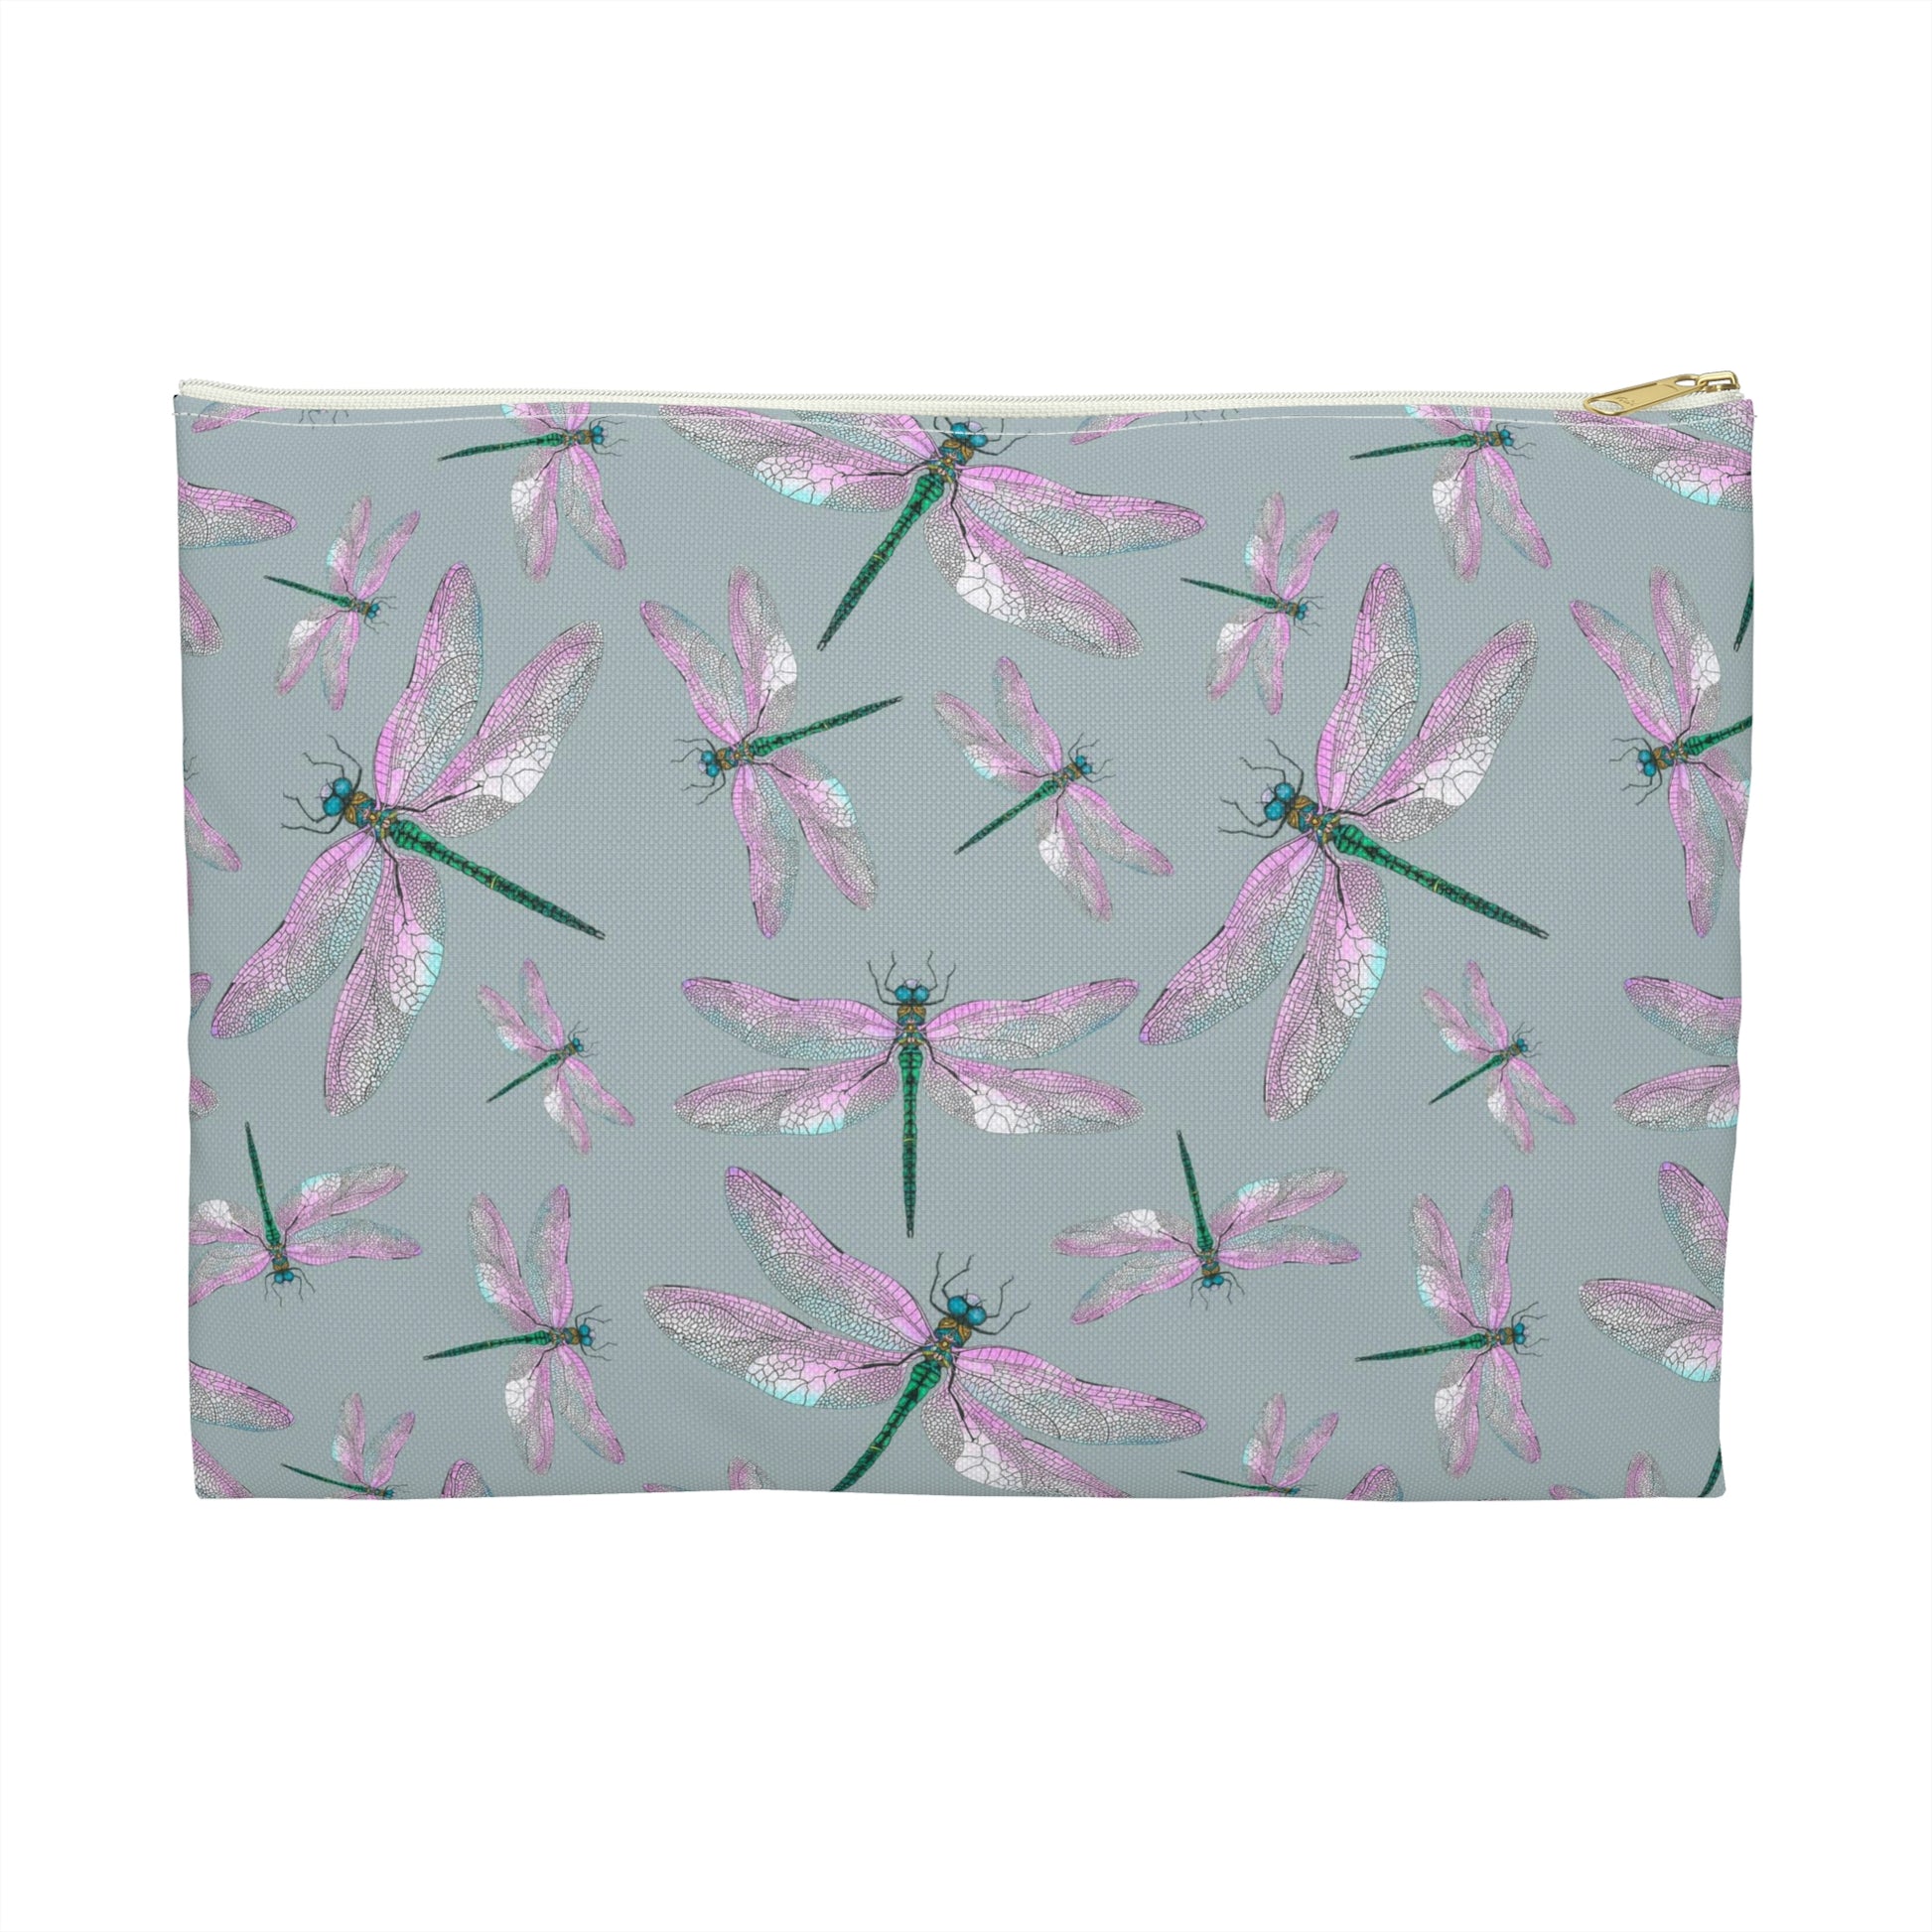 blue makeup bag with pink dragonfly print